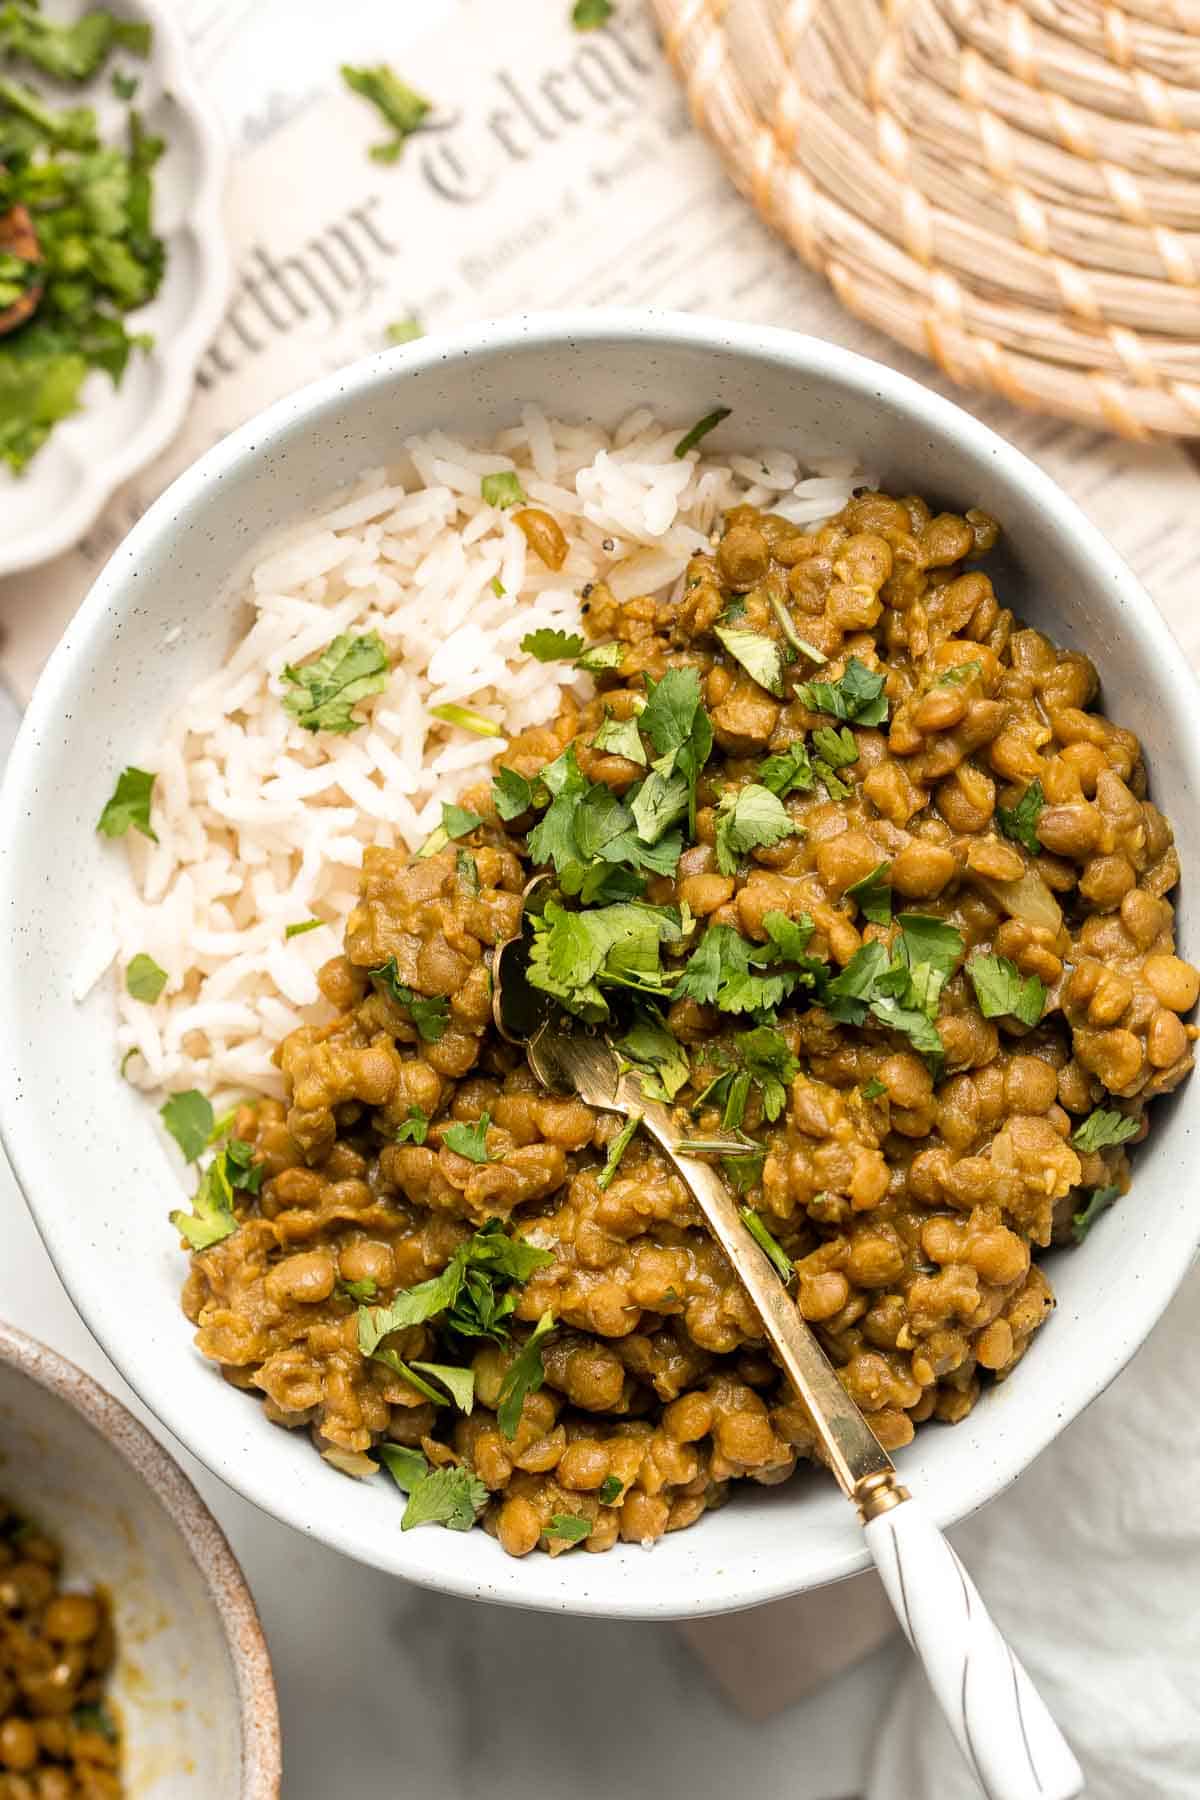 Easy 20-Minute One Pot Lentils are a healthy, nourishing, and delicious vegan meal that is easy to make in a few simple steps. Make a big batch and freeze! | aheadofthyme.com